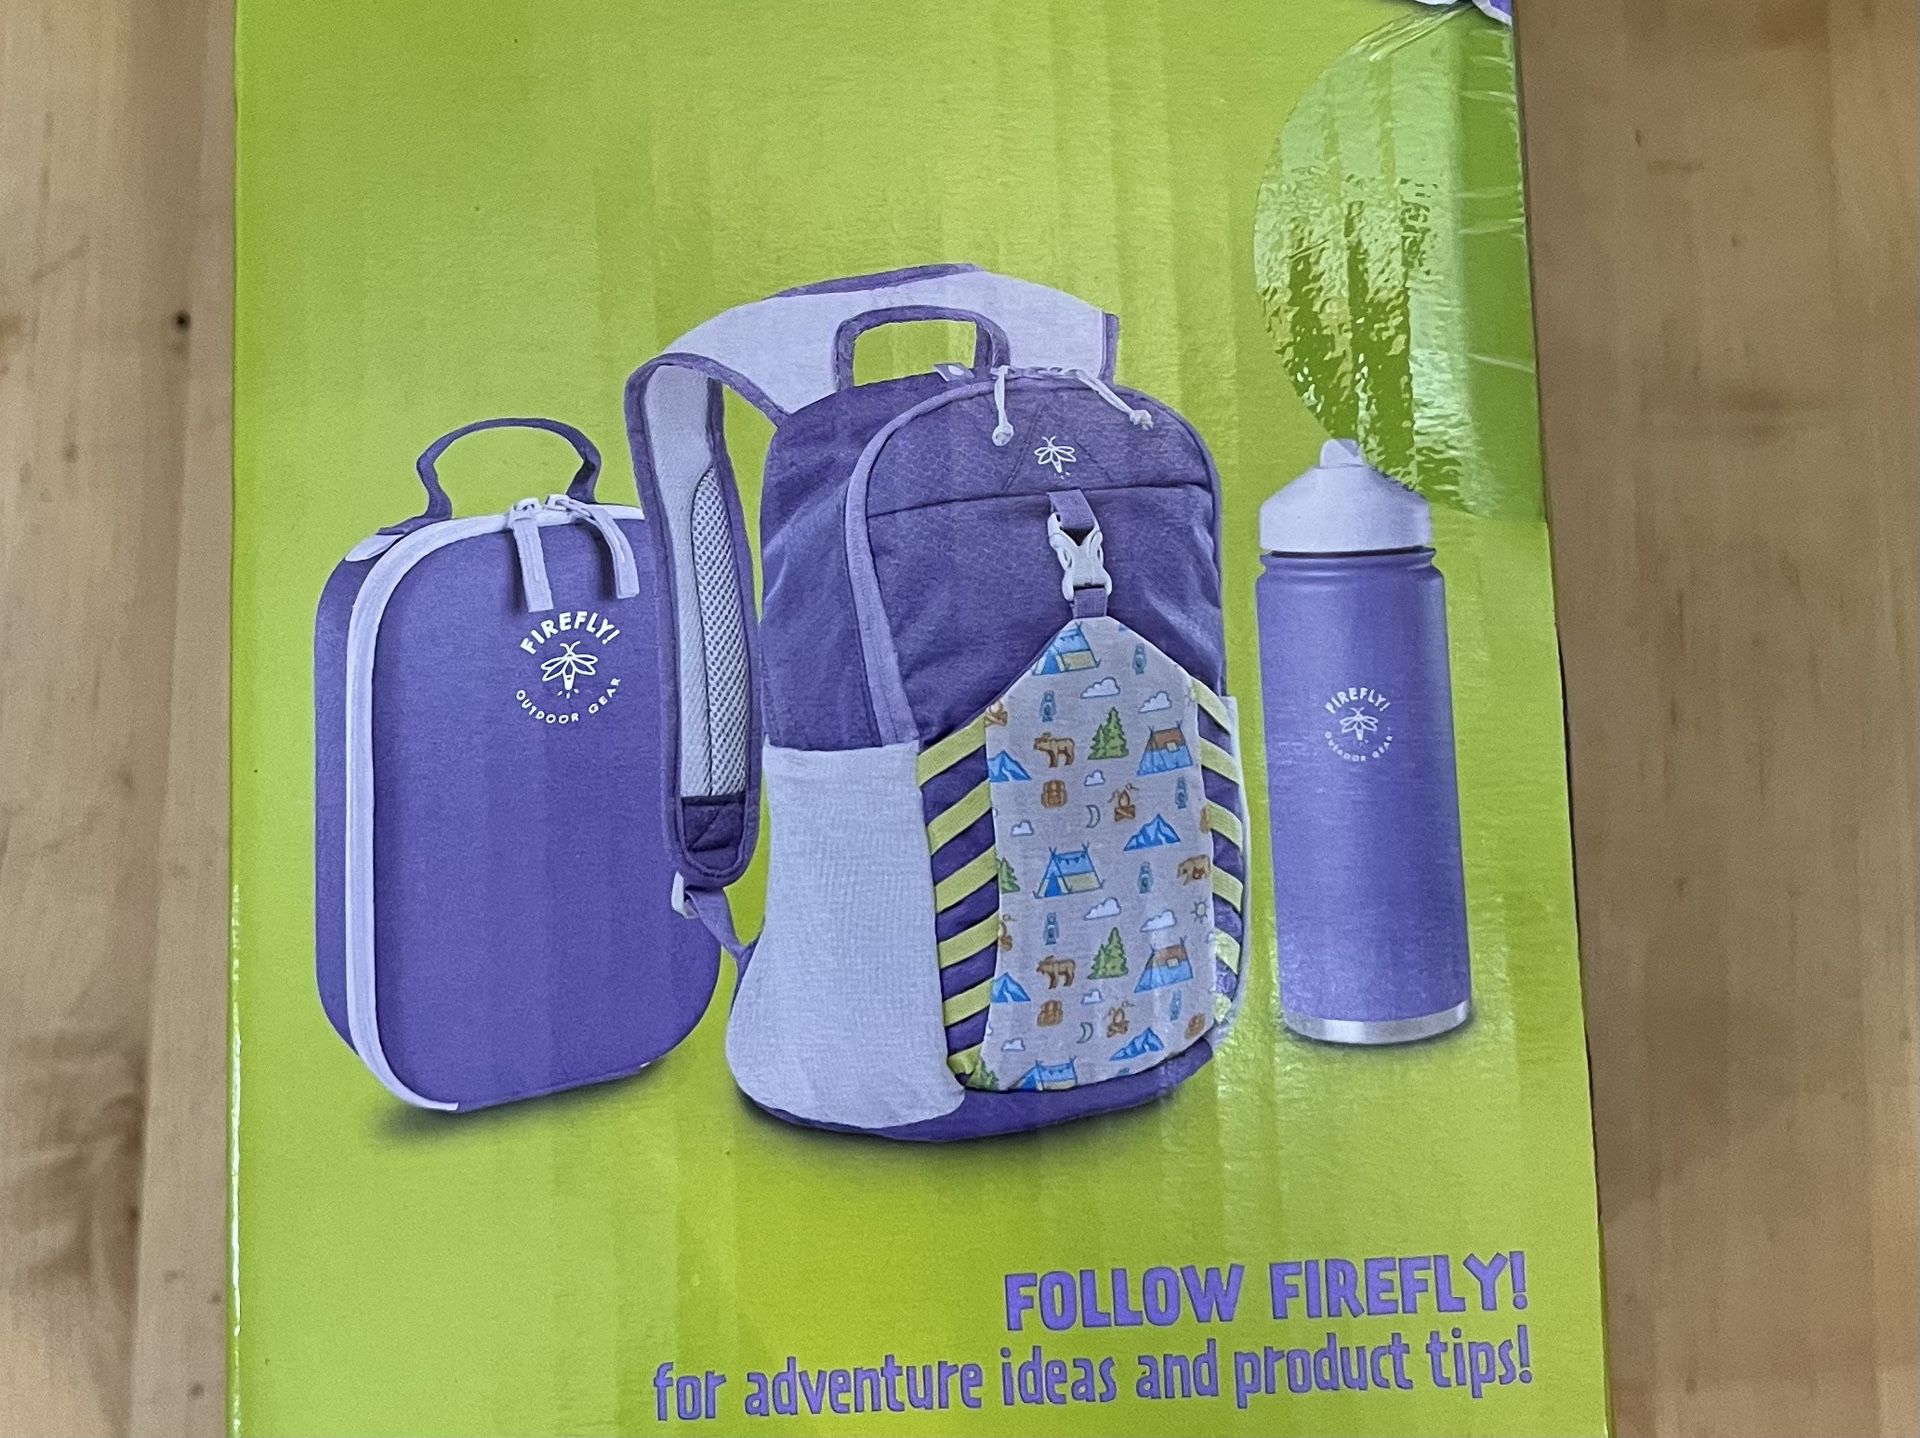 Firefly Camping Gear 10 ltr. Backpacking Backpack, Purple and Green